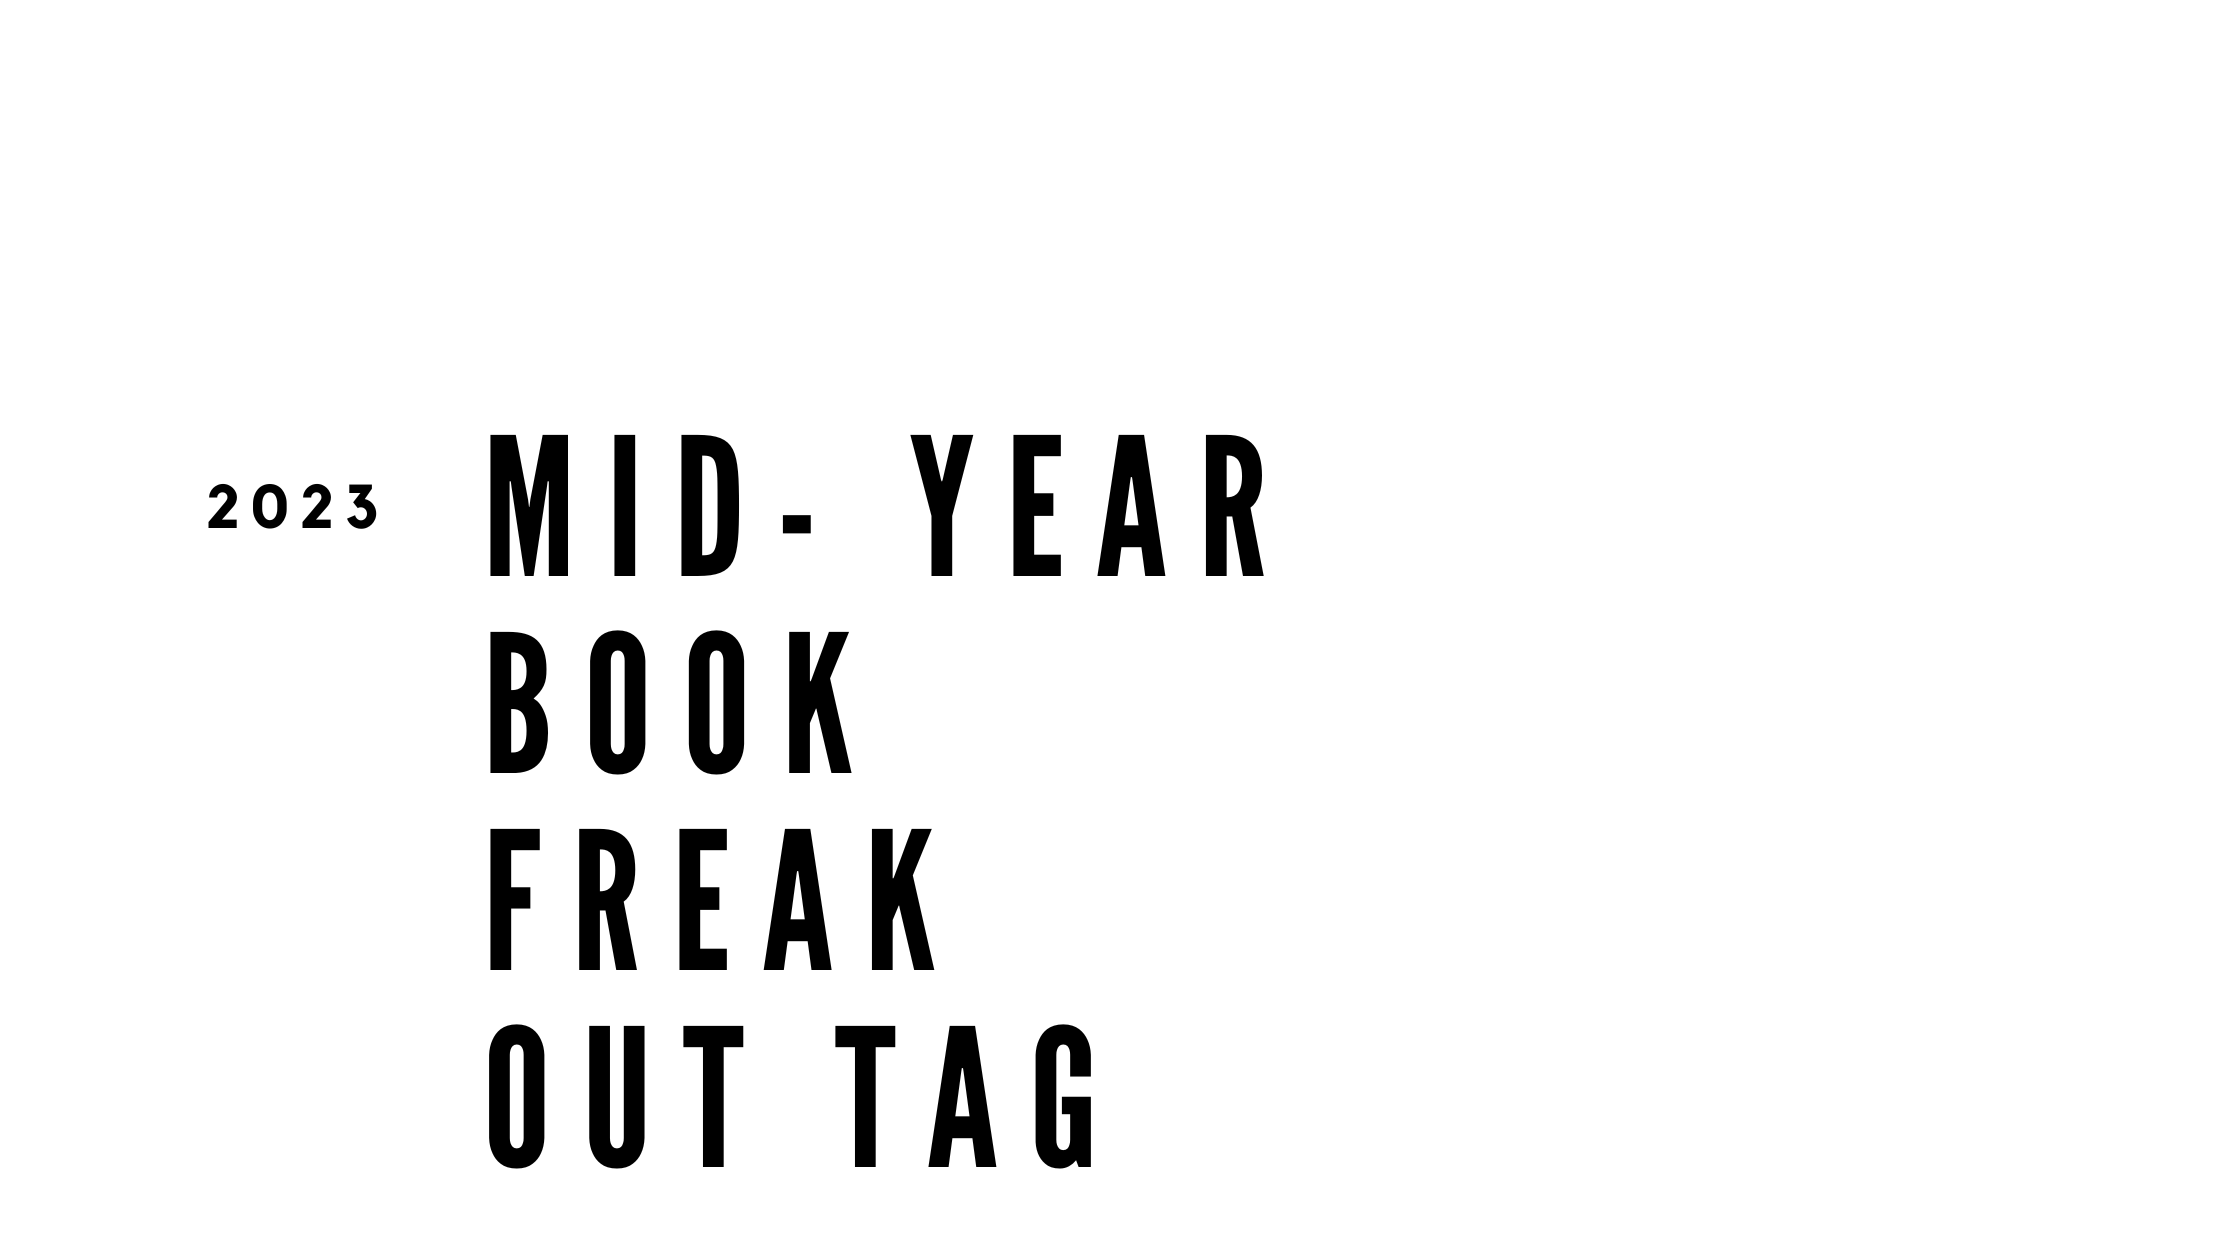 2023 Mid-Year Book Freak Out Tag